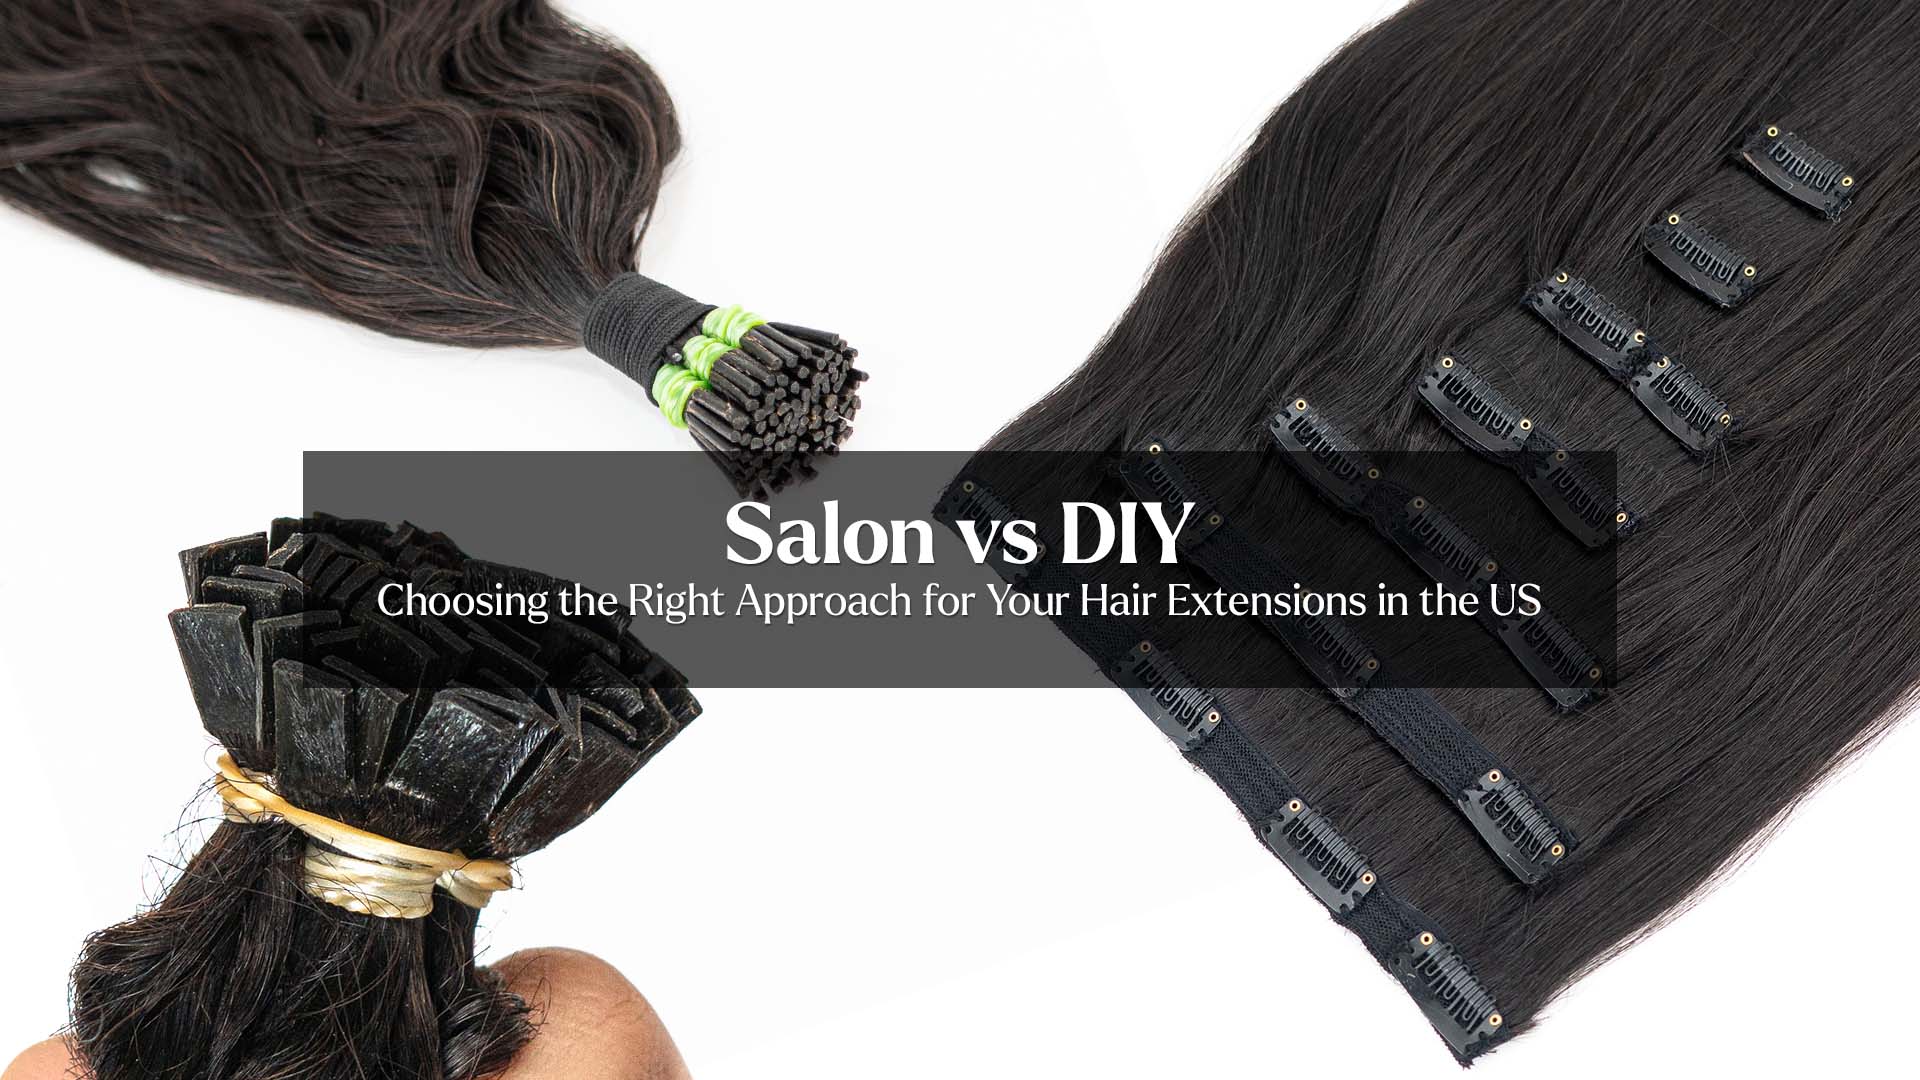 Salon vs. DIY: Choosing the Right Approach for Your Hair Extensions in the US